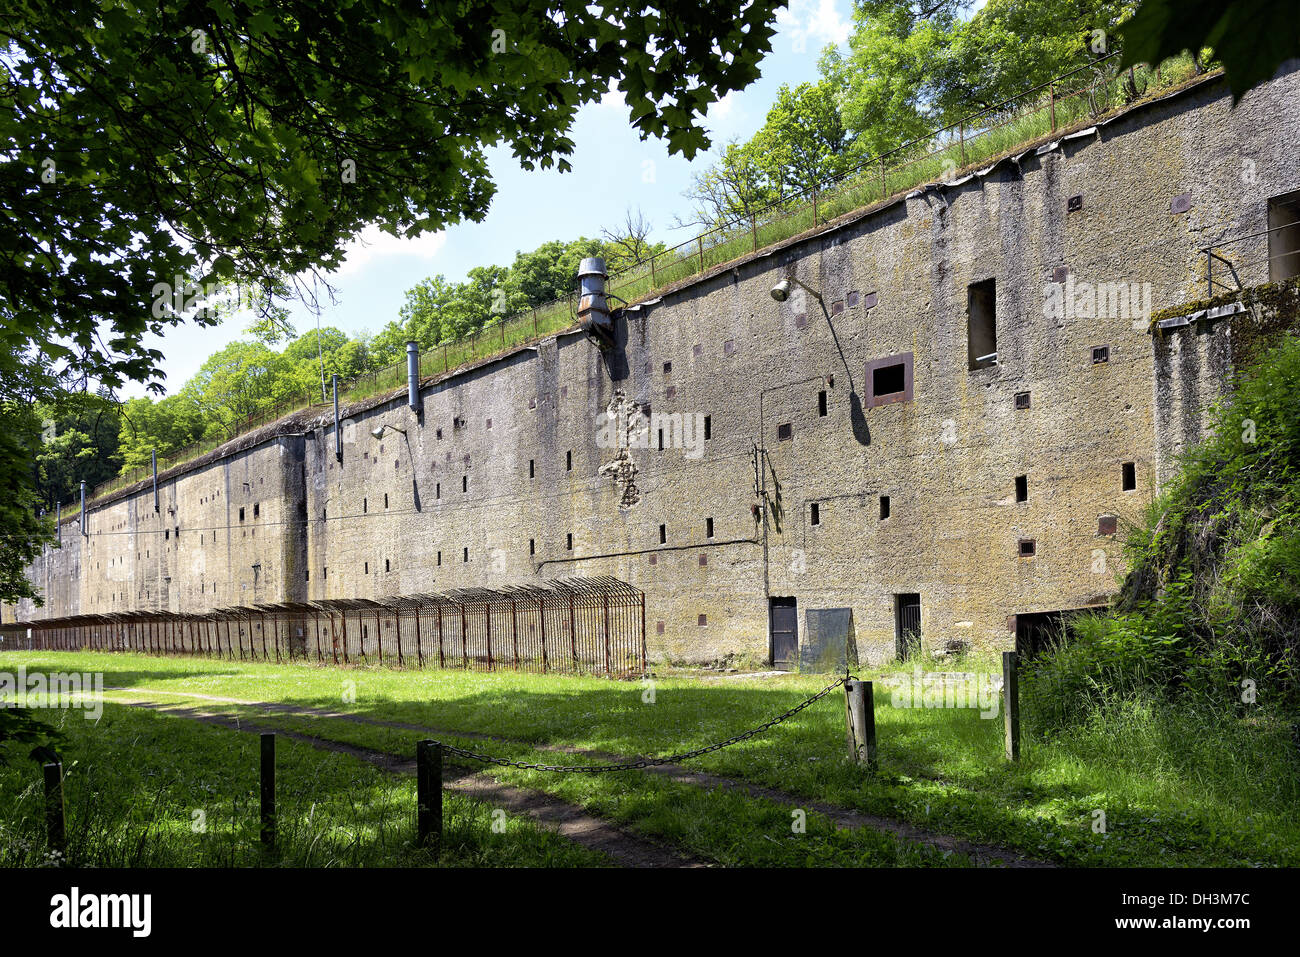 Guentrange fortress, Maginot line. Stock Photo